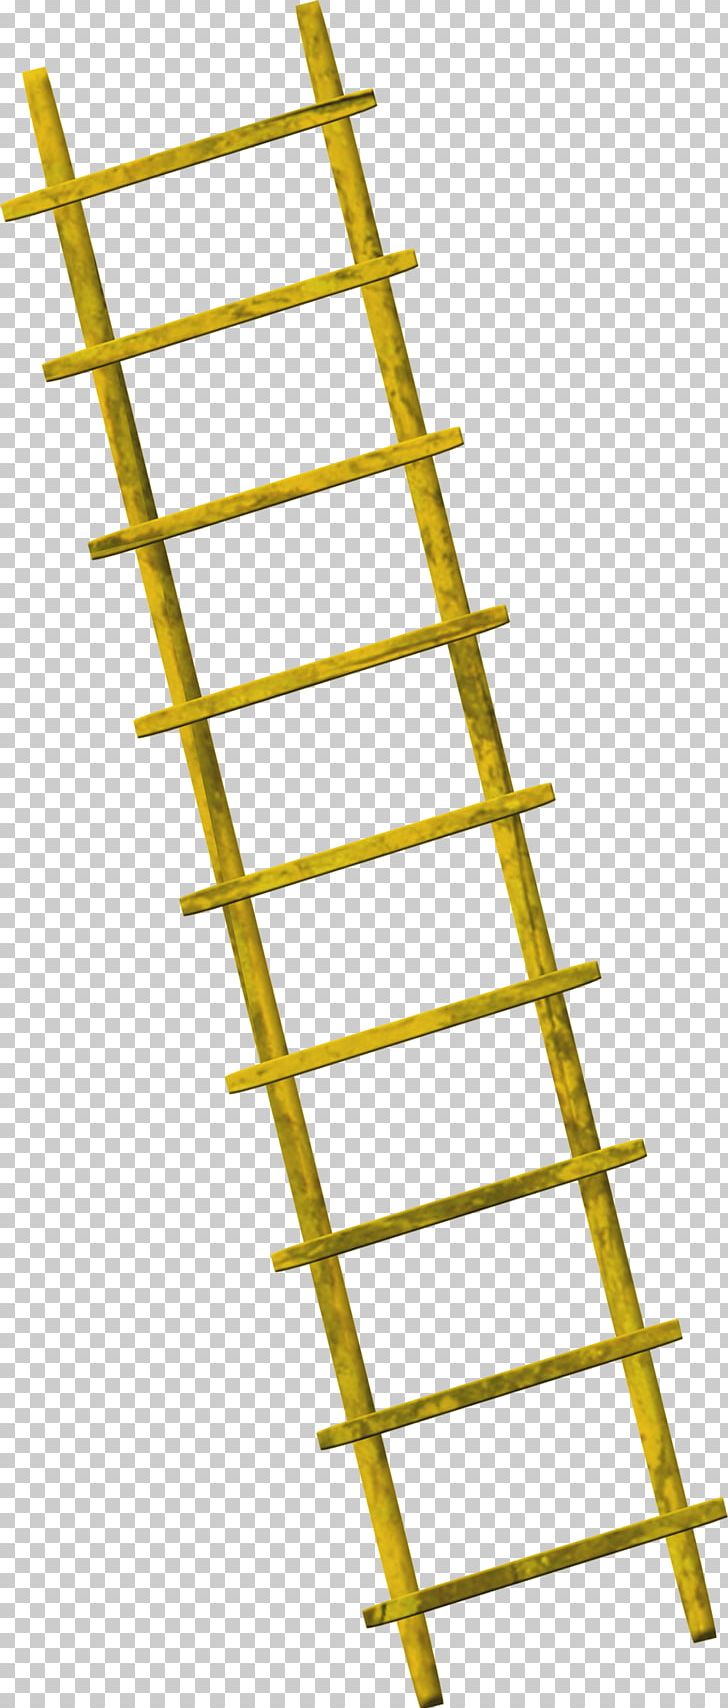 Stairs Ladder Antibabypille Hlaing Township PNG, Clipart, Angle, Antibabypille, Building, Category, Company Free PNG Download